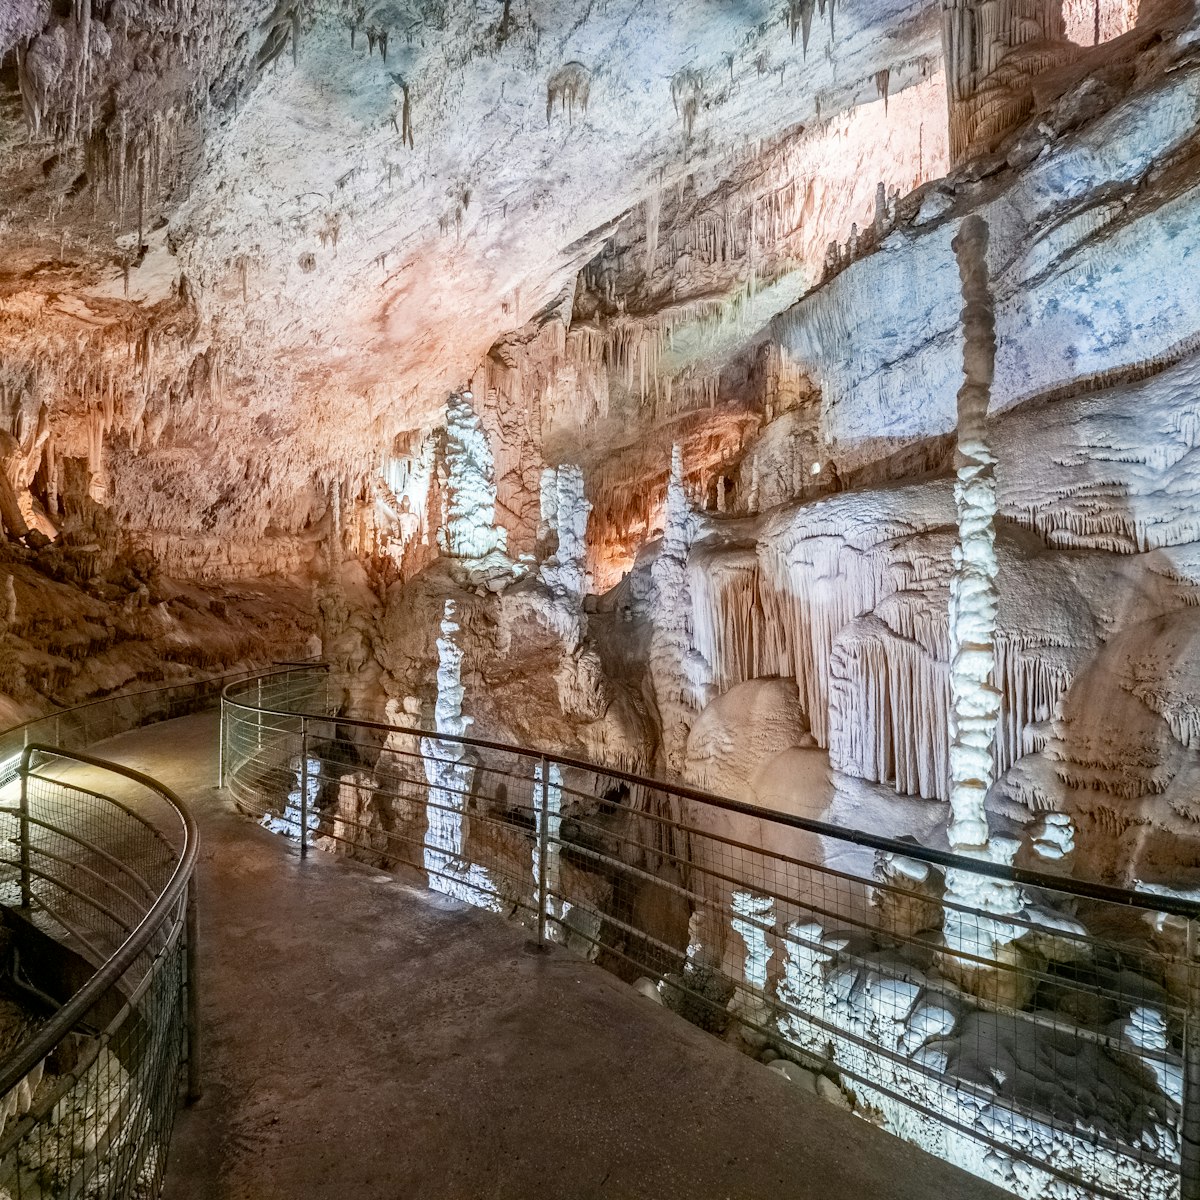 The Jeita Grotto in Lebanon is a system of two separate, but interconnected, karstic limestone caves.